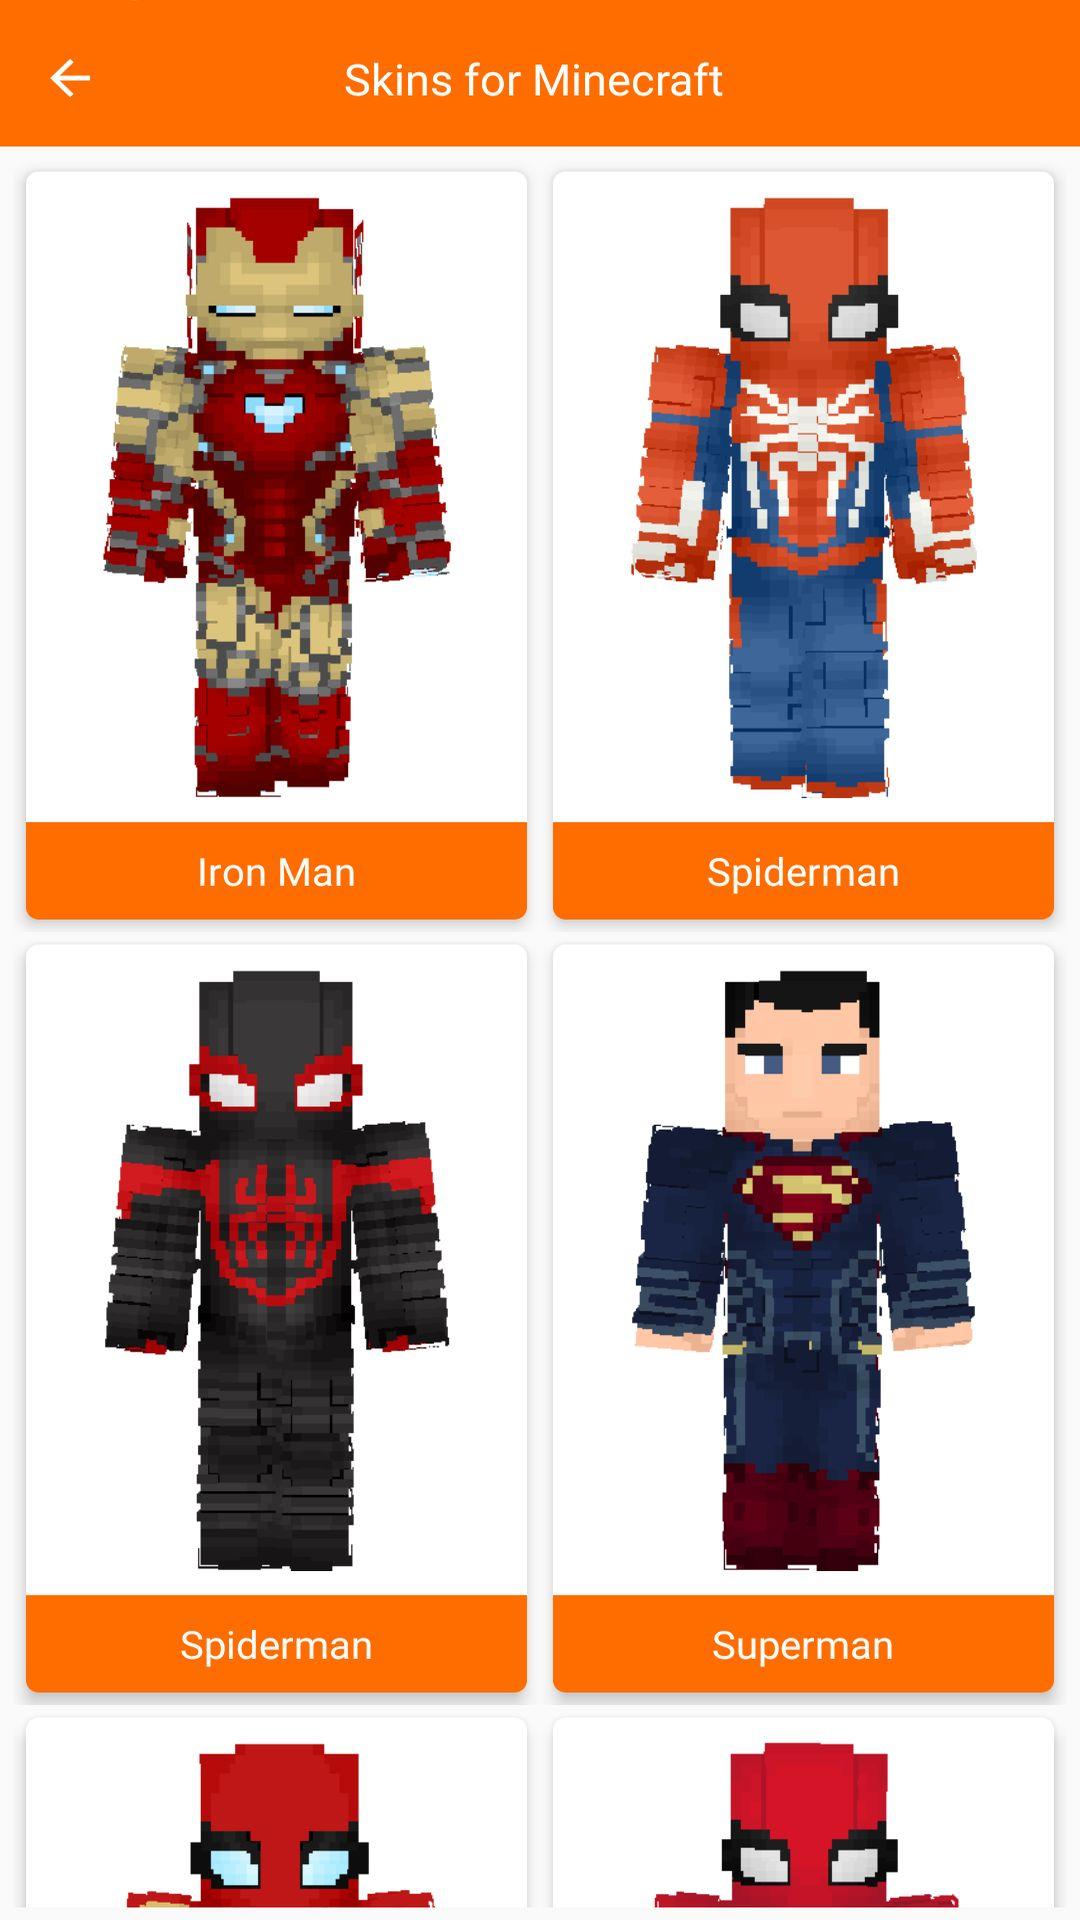 Superhero Skin For Minecraft Apk For Android Download